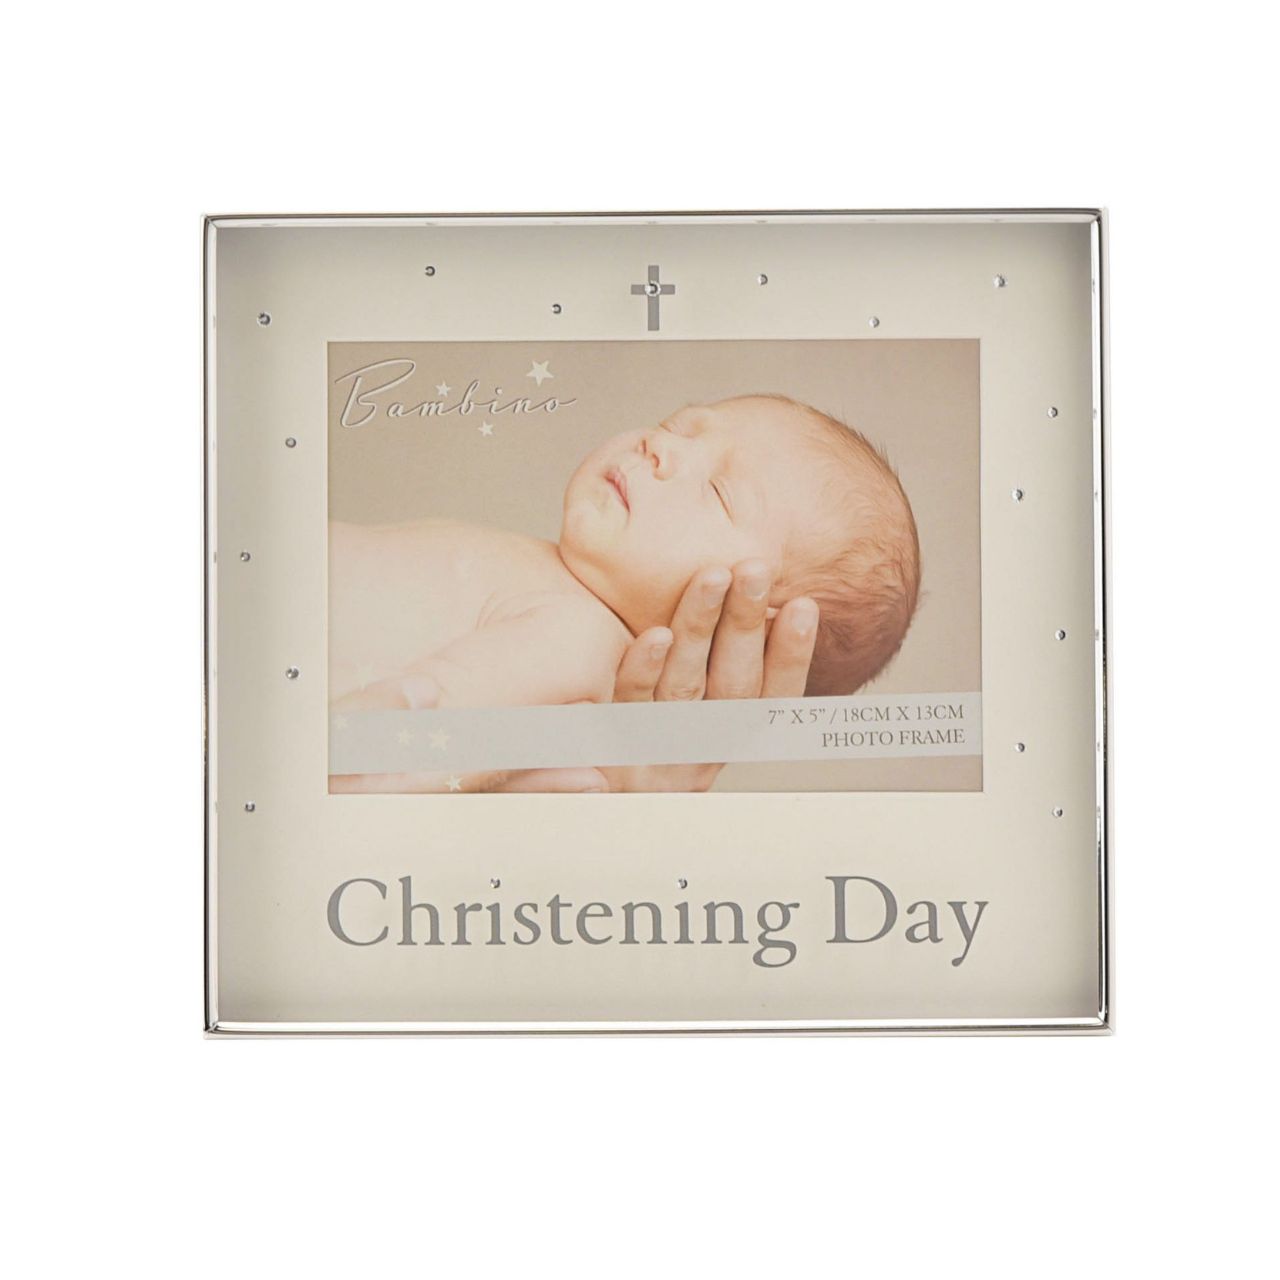 Christening Silver Plated Photo Frame 7" x 5"  A beautiful silver plated 7" x 5" photo frame from BAMBINO BY JULIANA. Featuring crisp white mount, mirror 'Christening Day' titling on the glass and crystal embellished crucifix icon. Complete with luxury black velveteen standing strut.